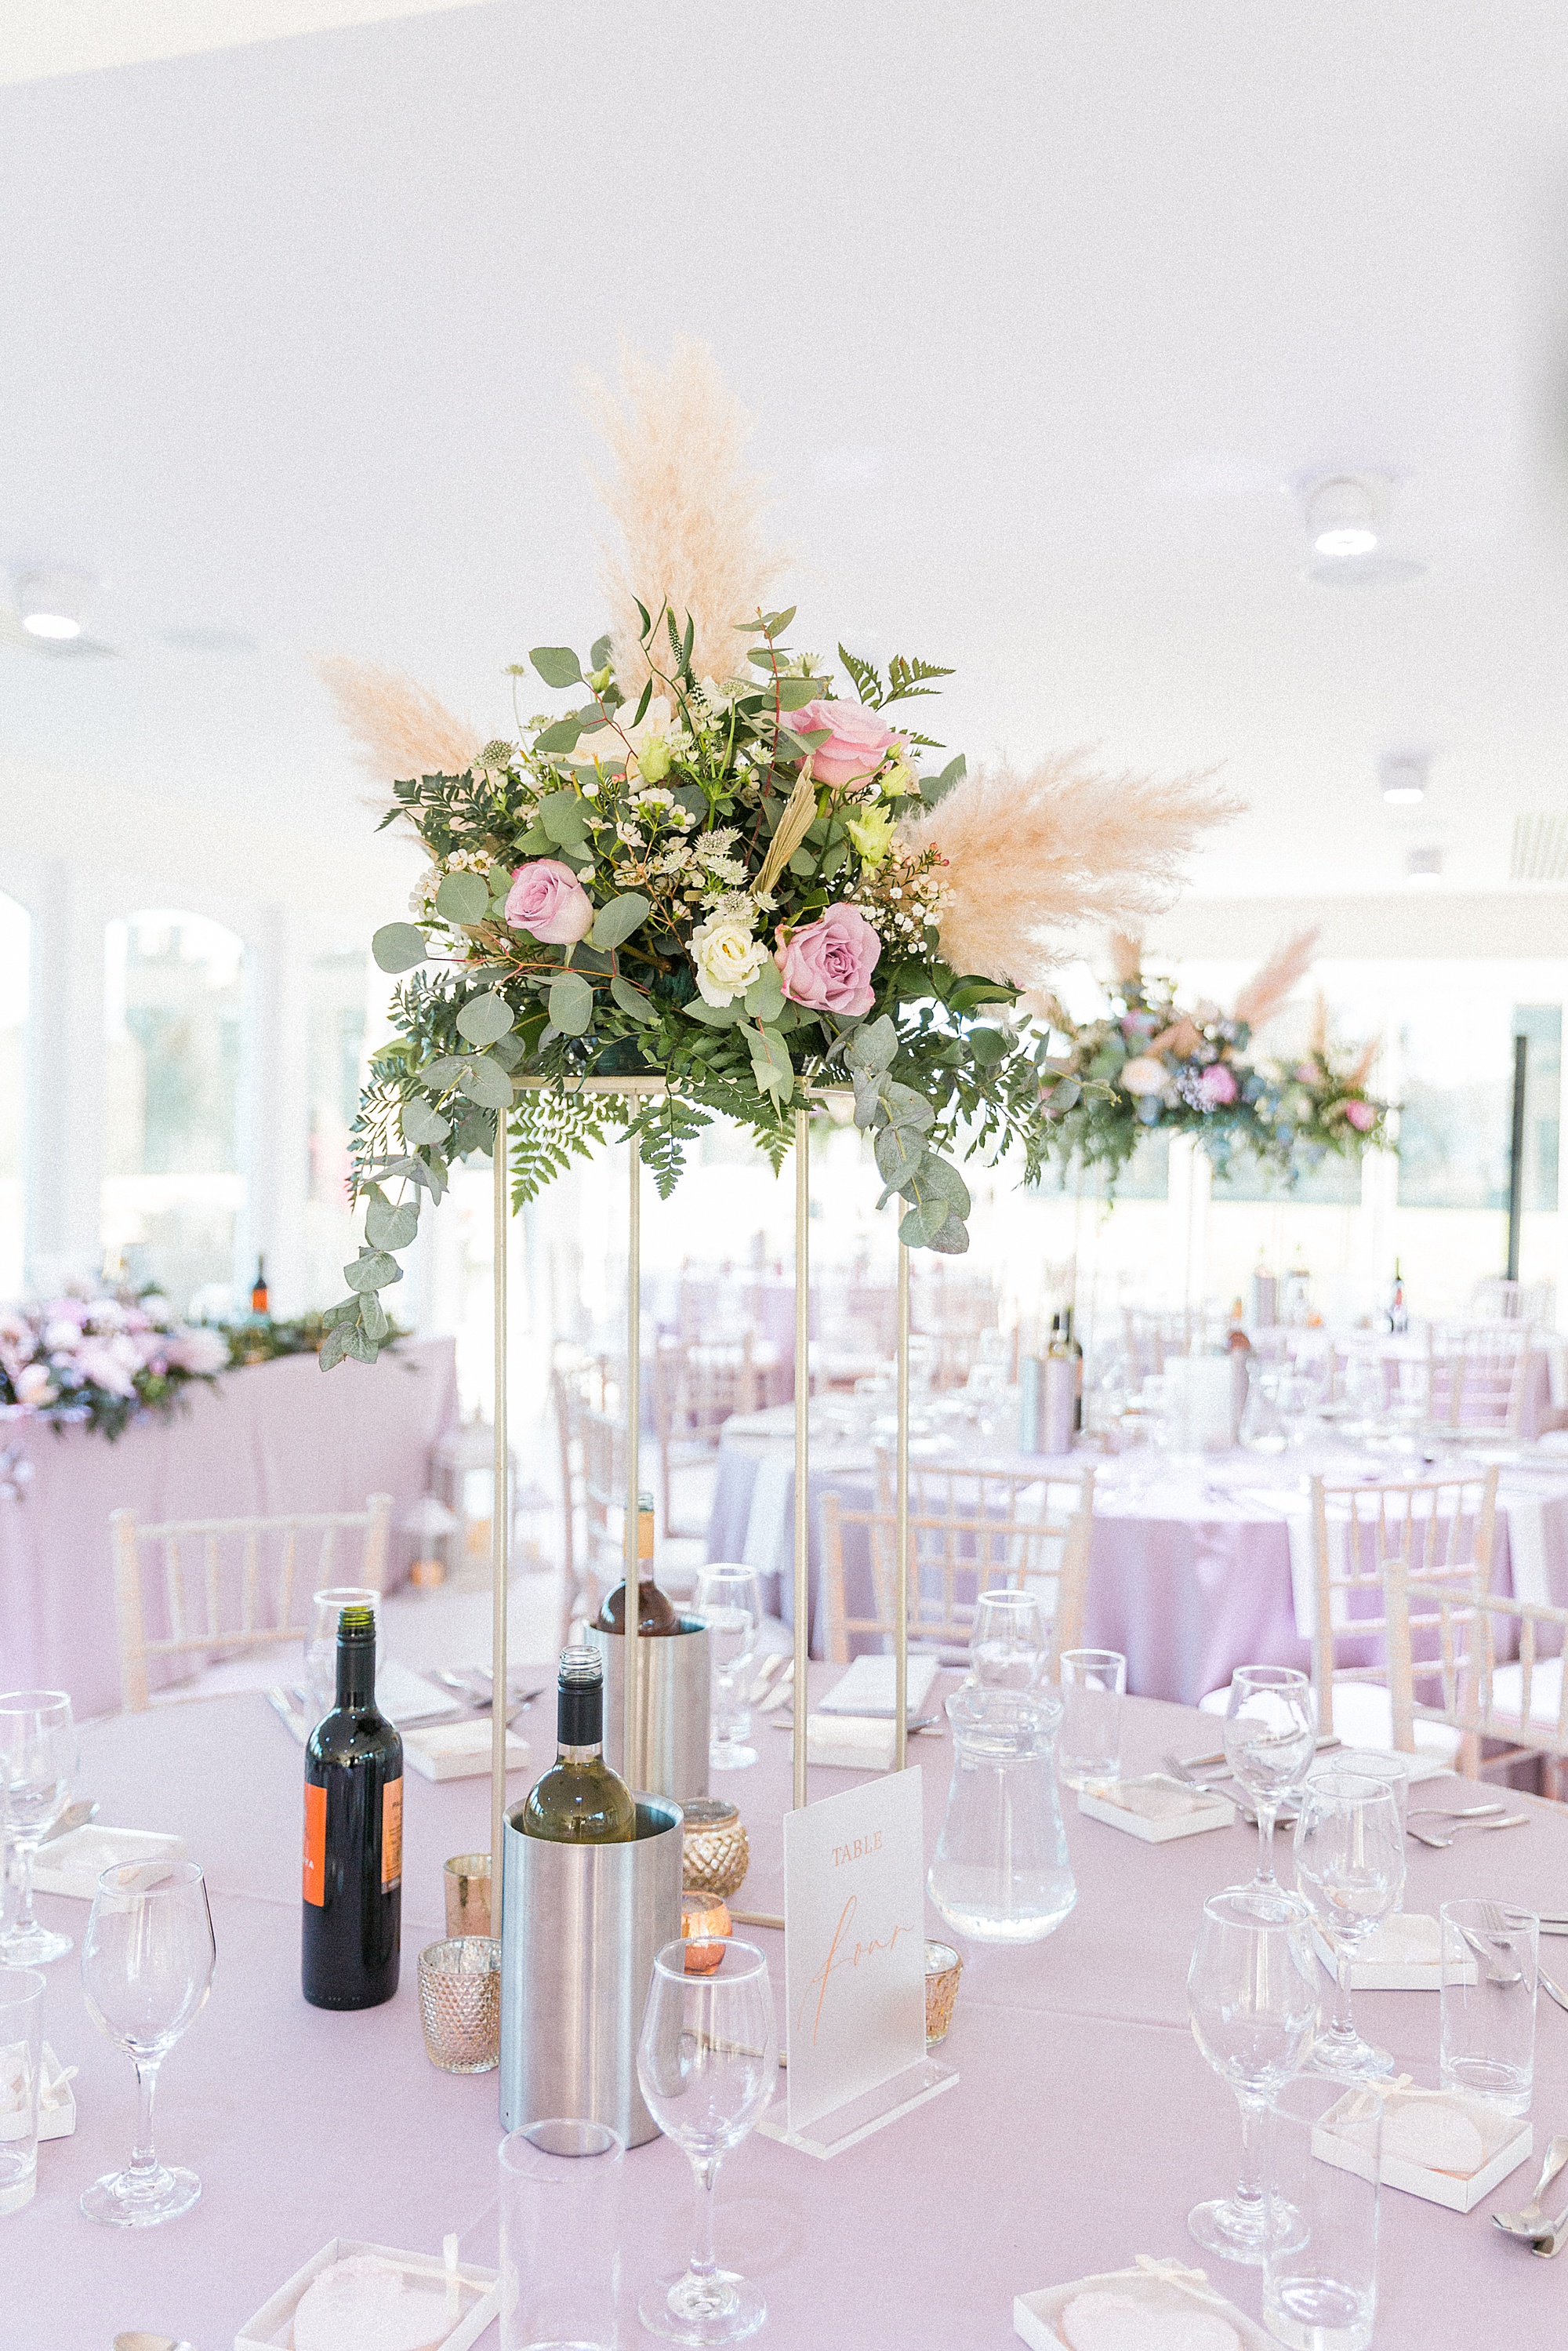 photo of the orangery at arley house decorated and set up ready for a wedding reception with pastel shades, beautiful floral table decor and gold too 